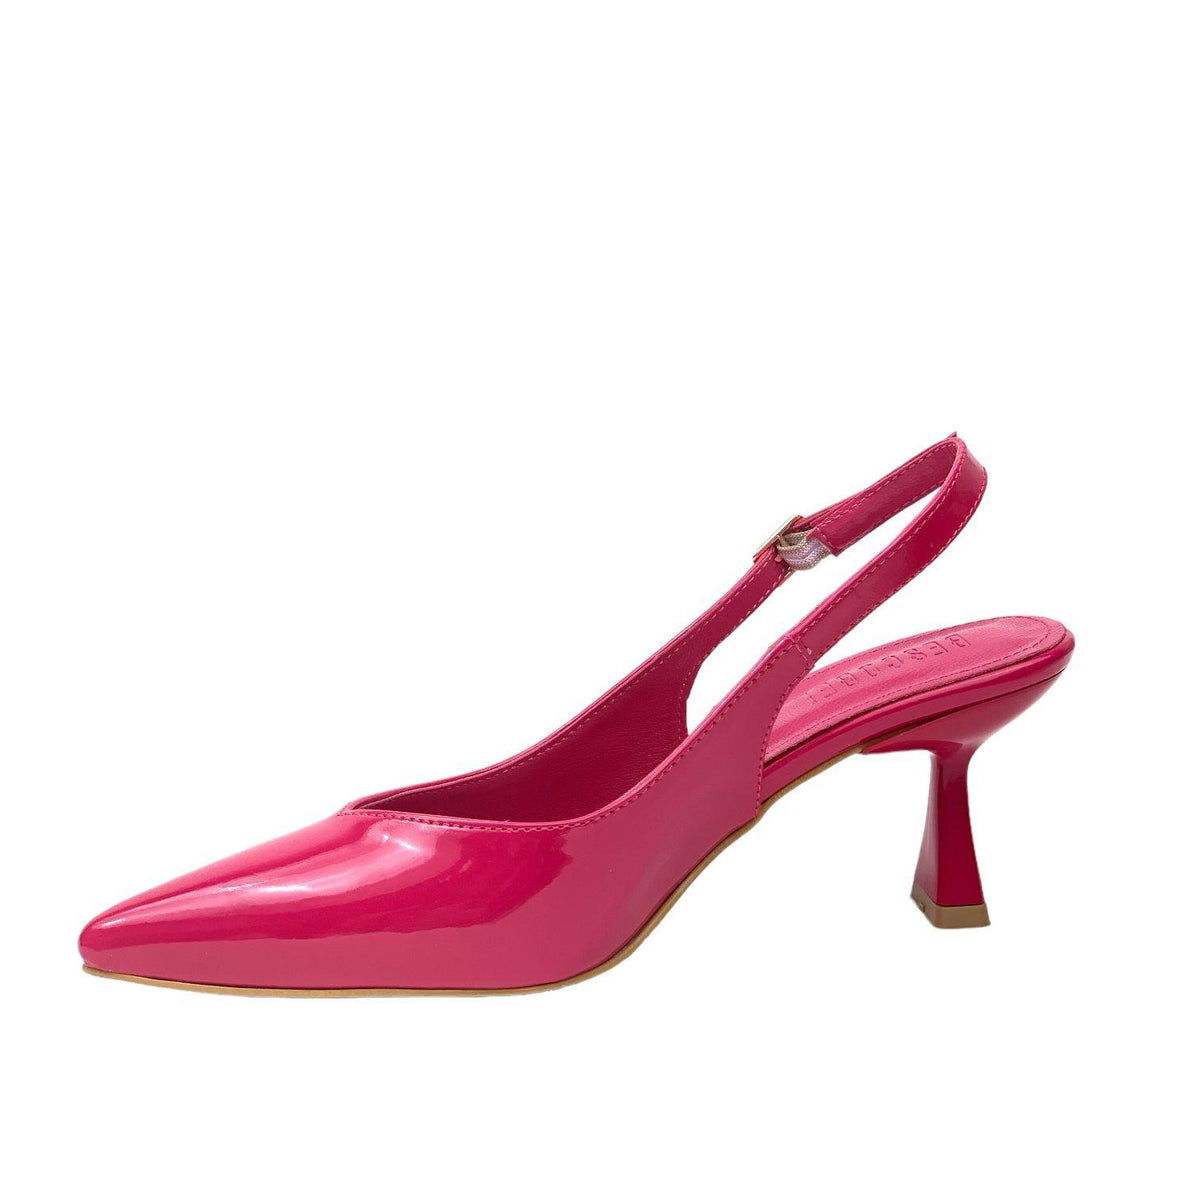 Women's Pasge Fuchsia Patent Leather Material Pointed Toe Heeled Sandals - STREETMODE ™